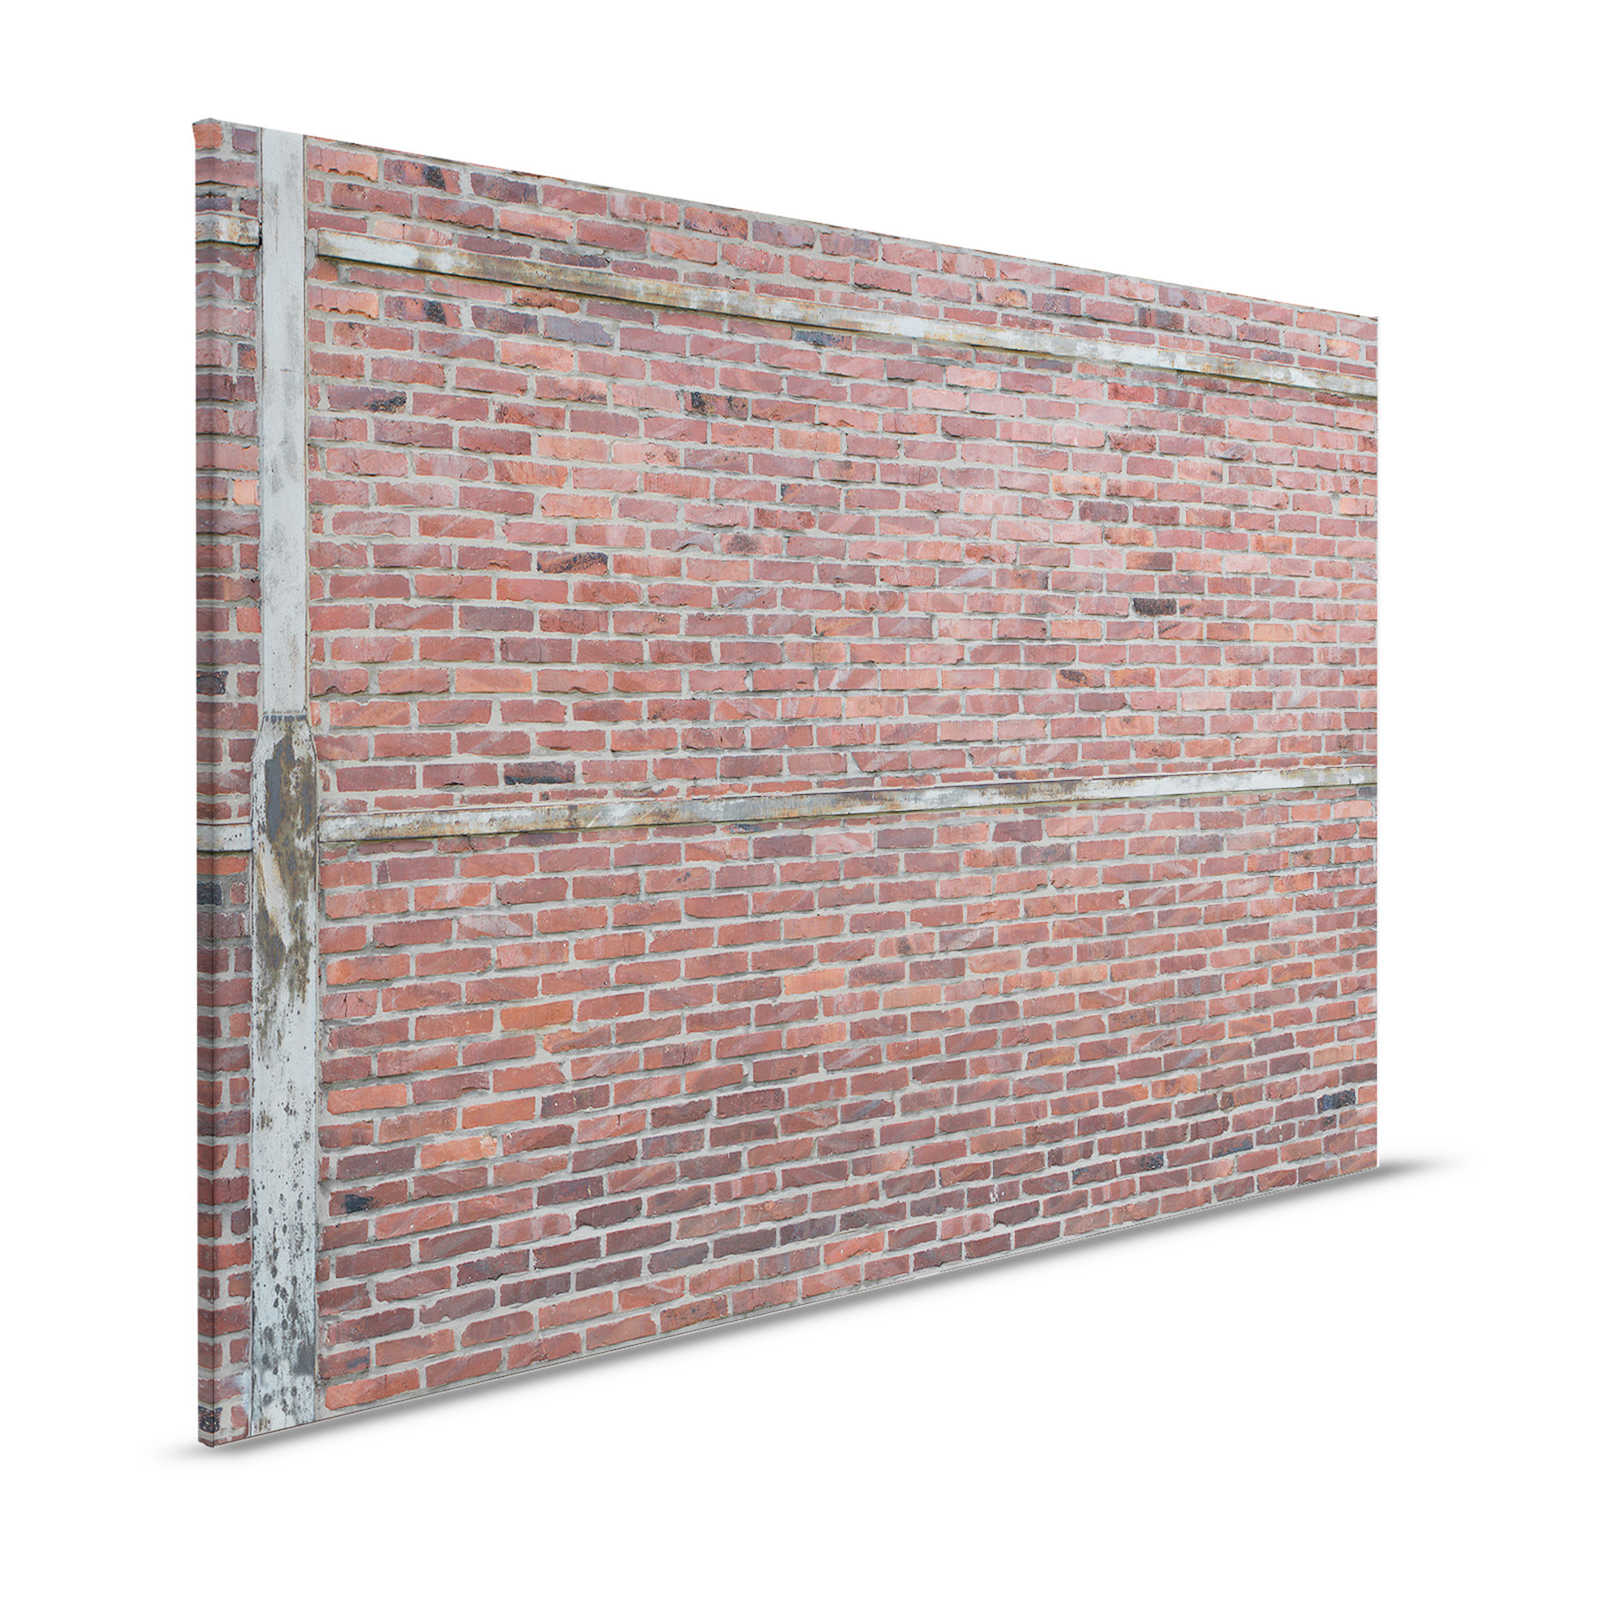 Canvas painting red brick wall in stone look - 1,20 m x 0,80 m
